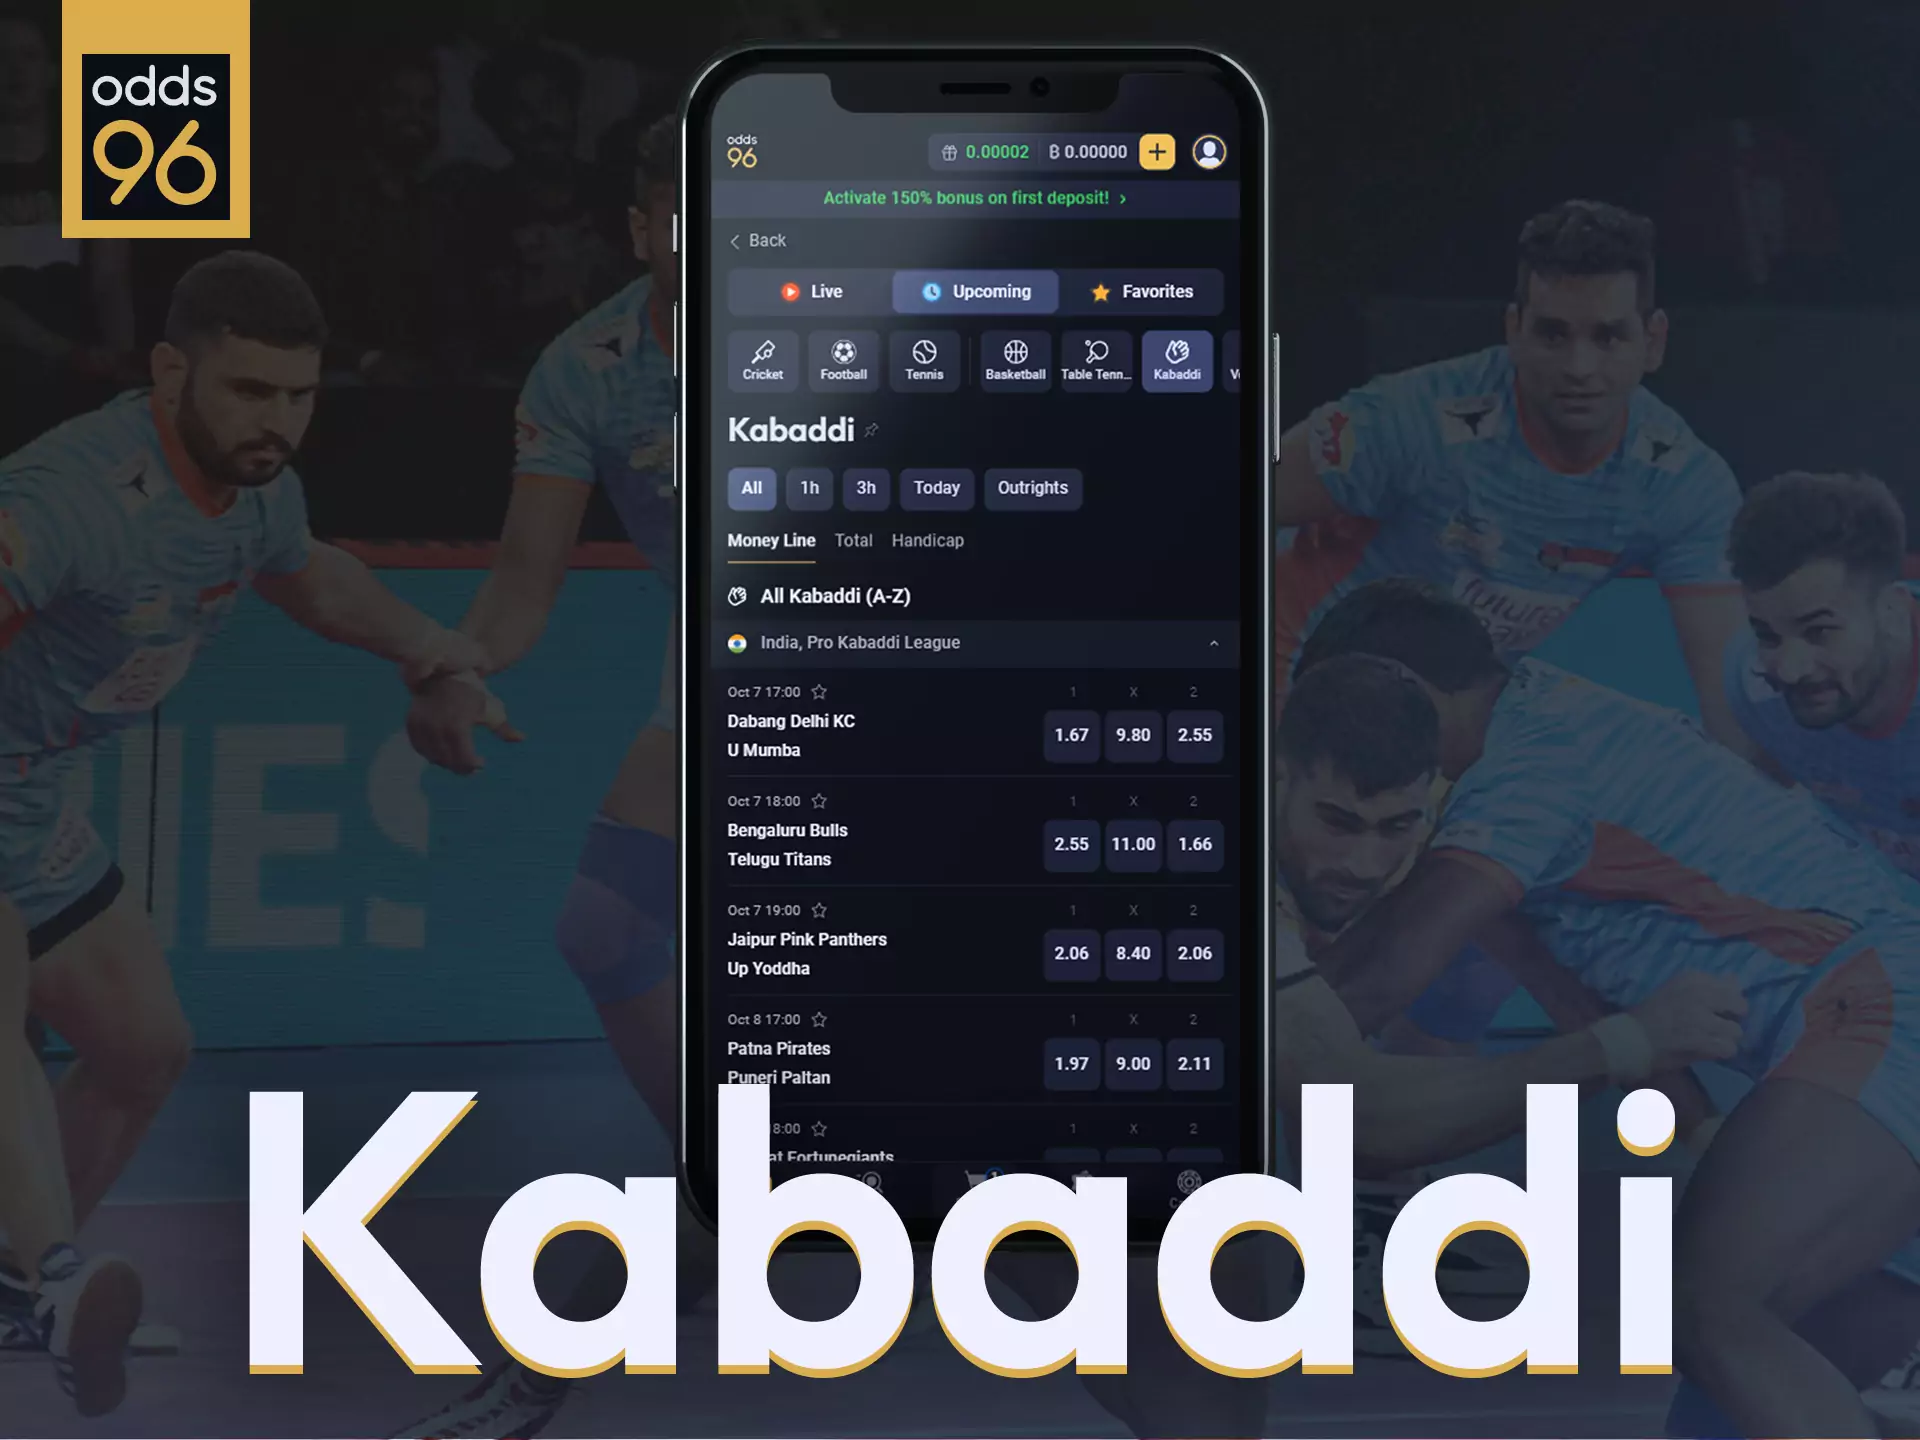 Place bets on kabaddi in Odds96.